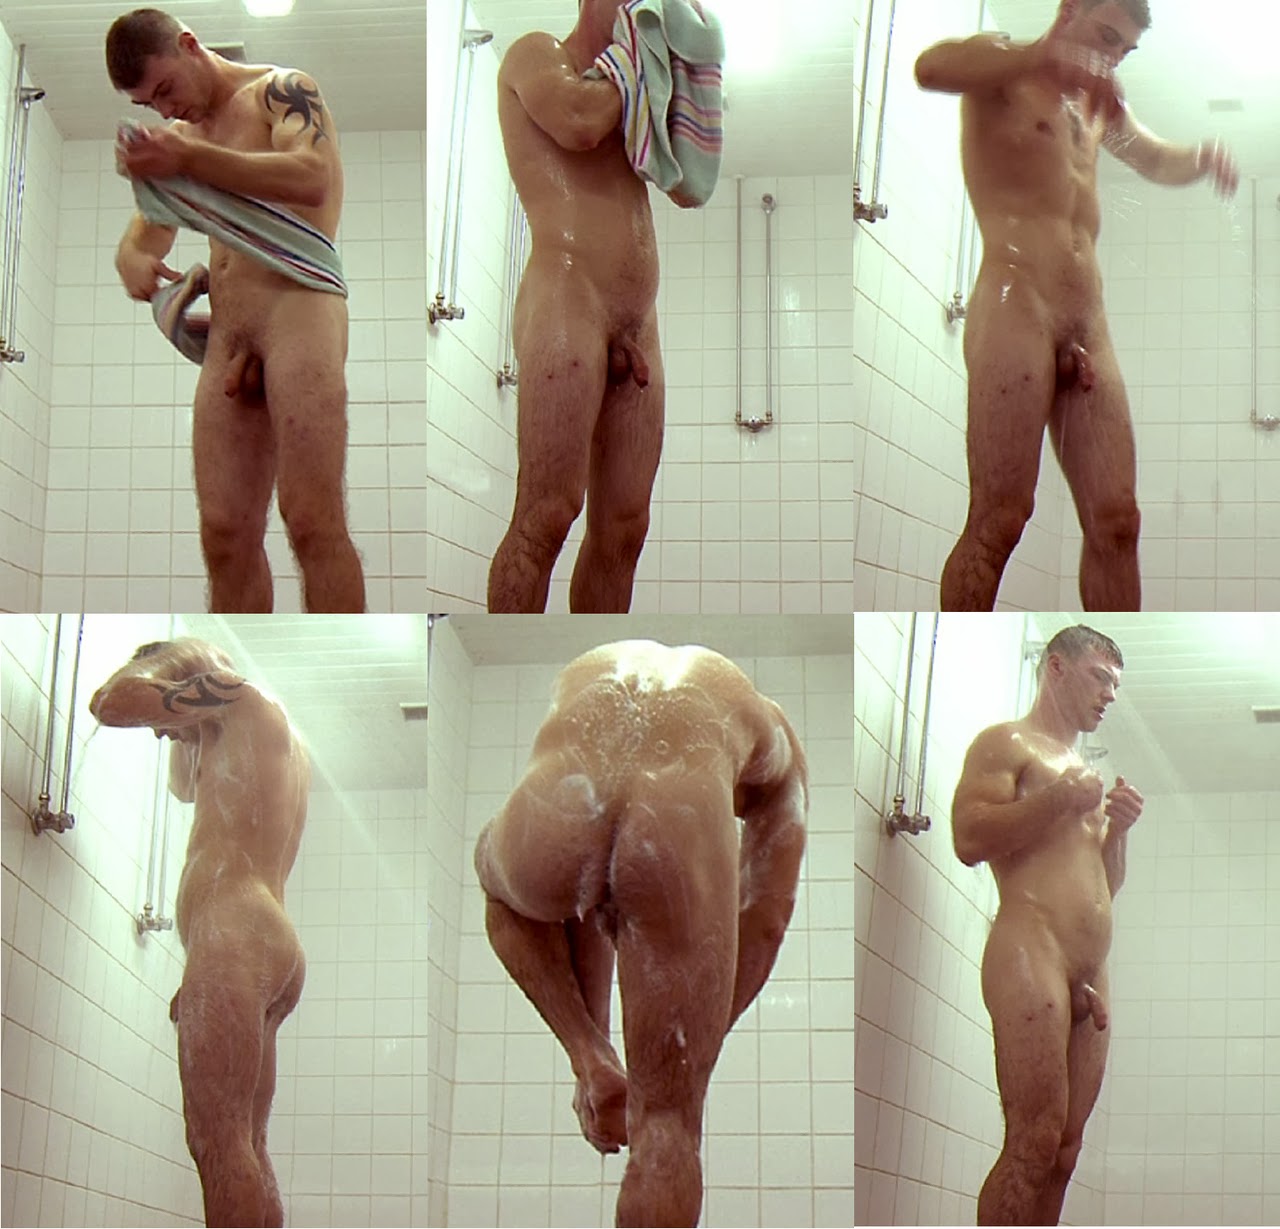 Voyeur Cam Shoots Gay Cocks And Asses In Shower.